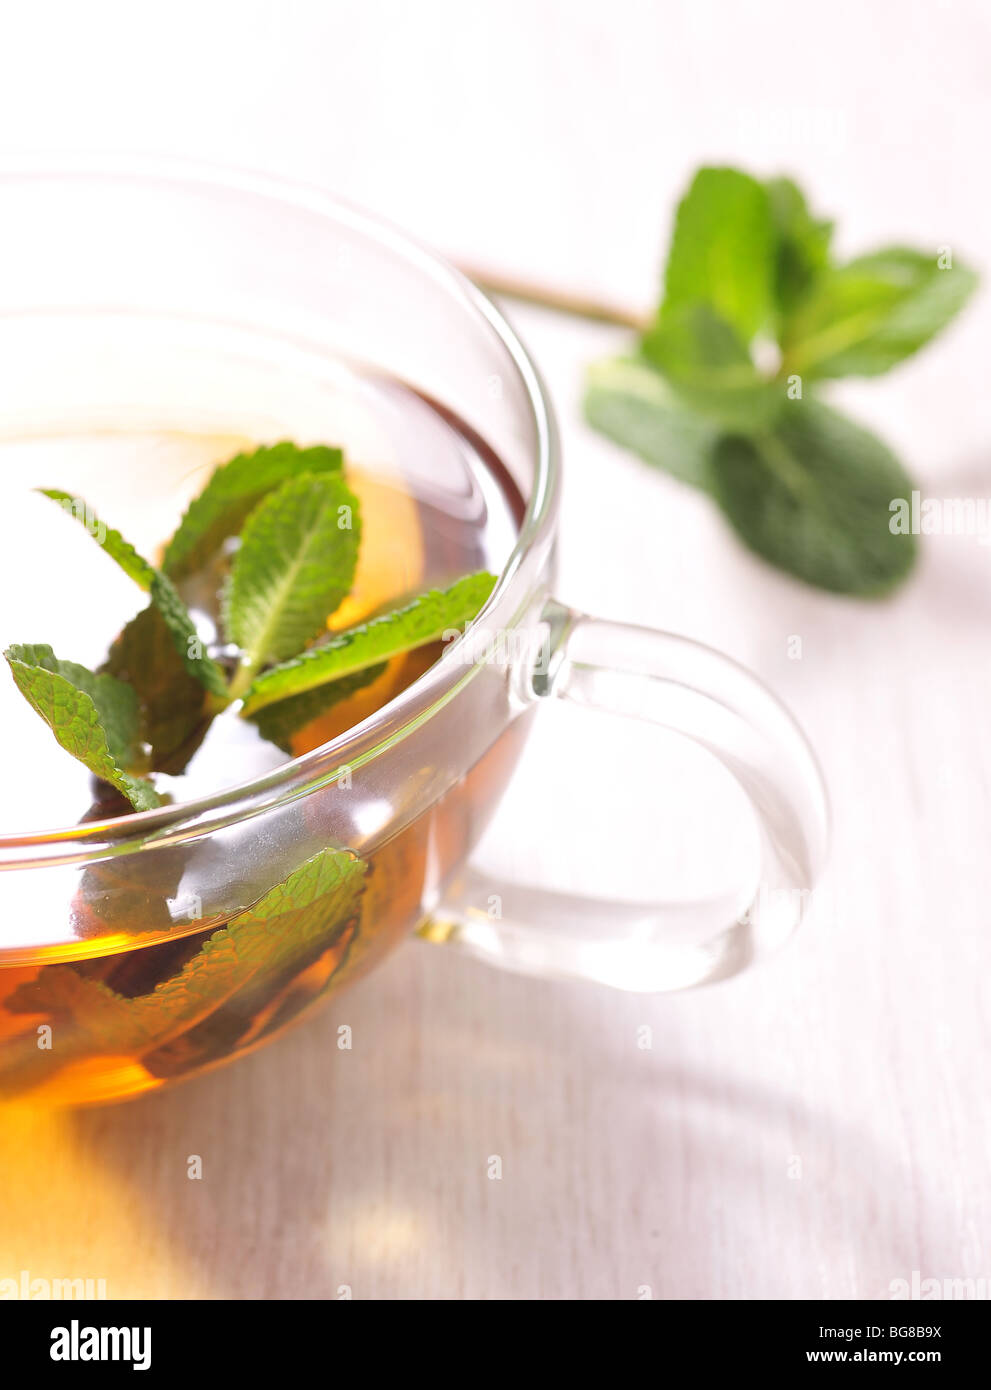 meant leaf and green tea Stock Photo